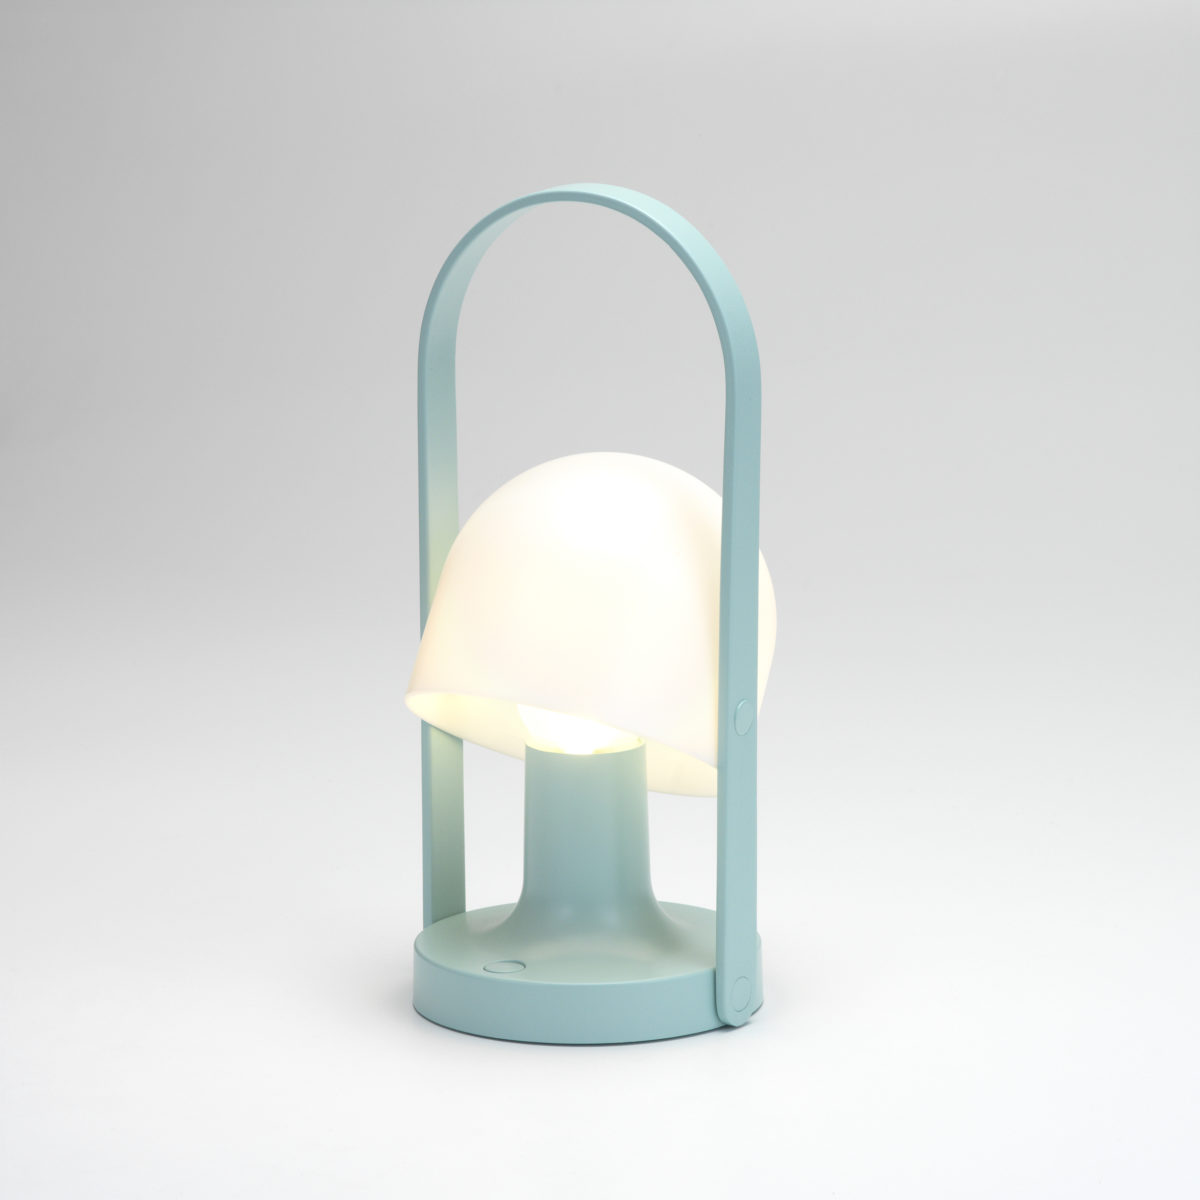 FollowMe Lamp - Official Store - Marset Store